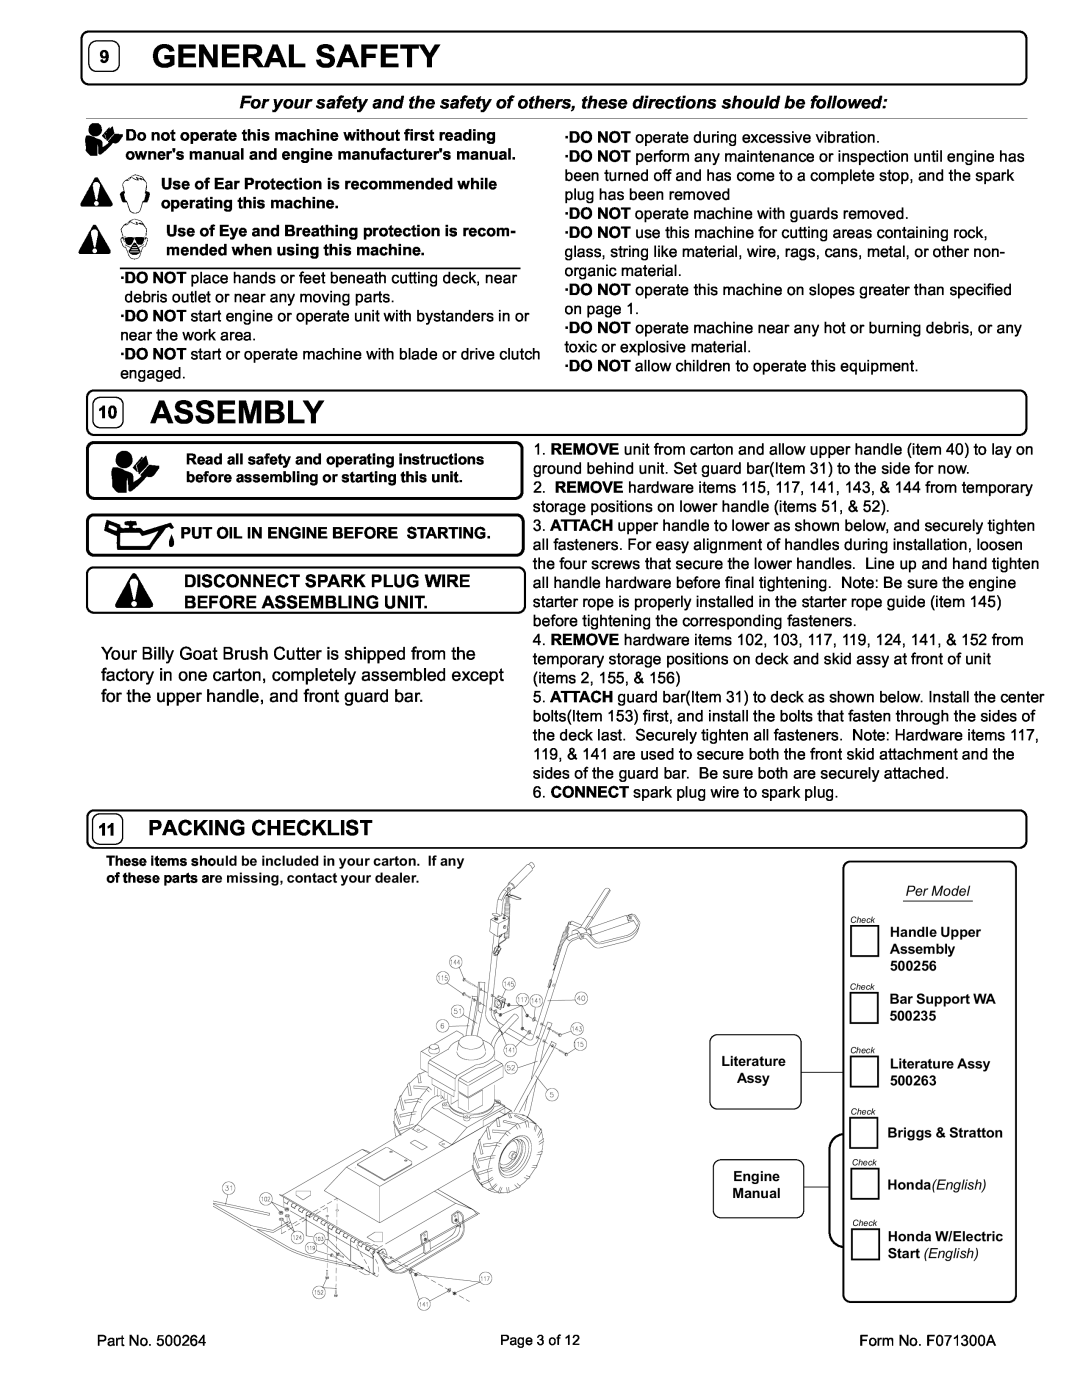 Billy Goat BC2401HE owner manual 9GENERAL SAFETY, 10ASSEMBLY, 11PACKING CHECKLIST 